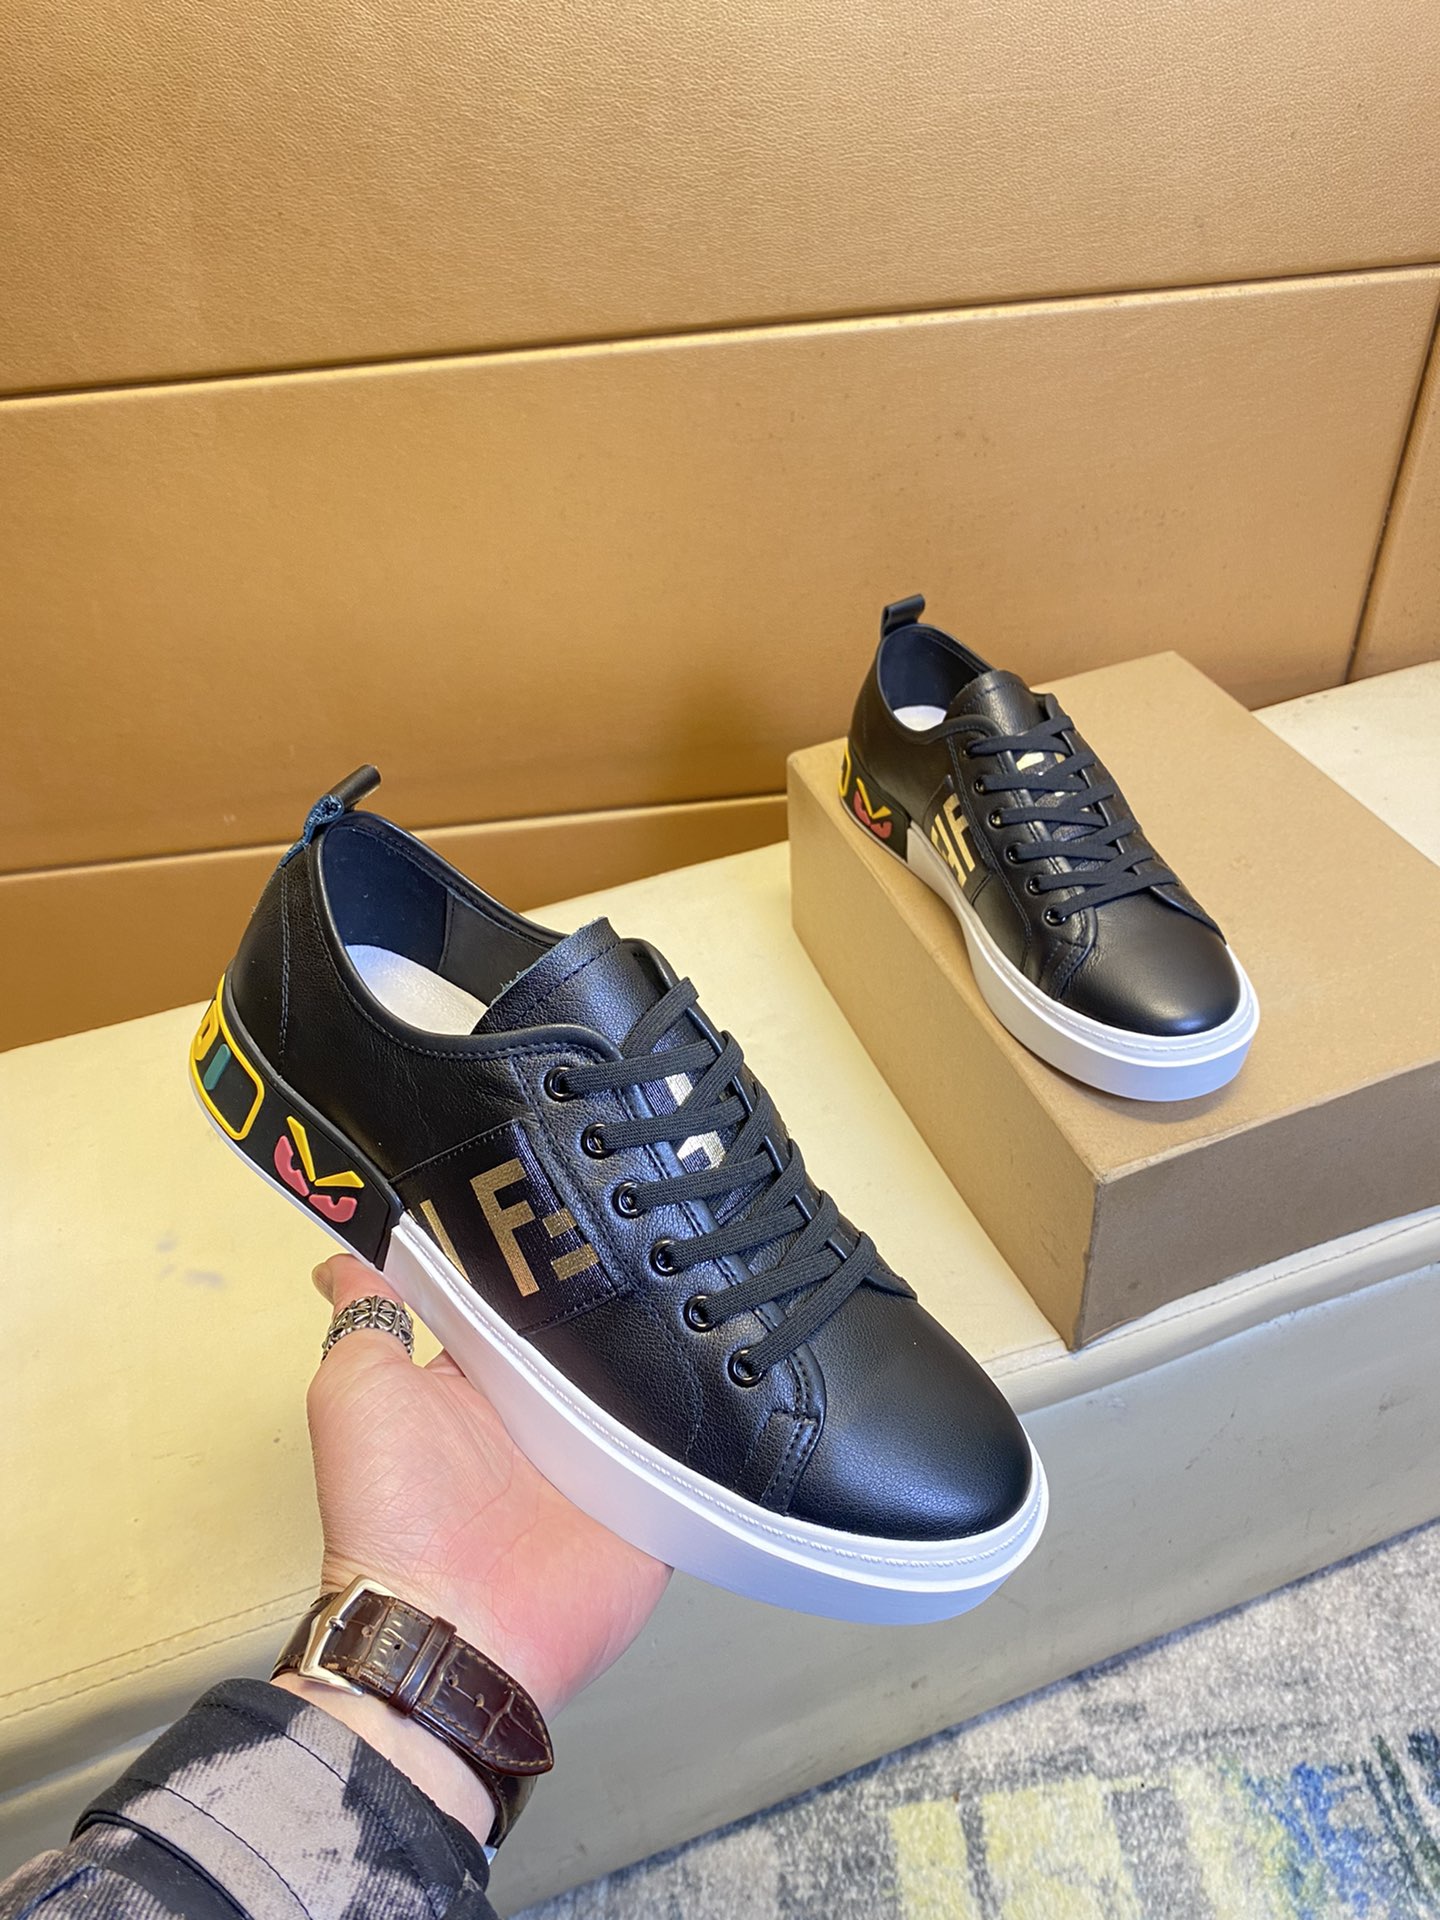 Exclusive first release of Fen ~ unique modern style sneakers. Counter purchasing casual shoes, orig